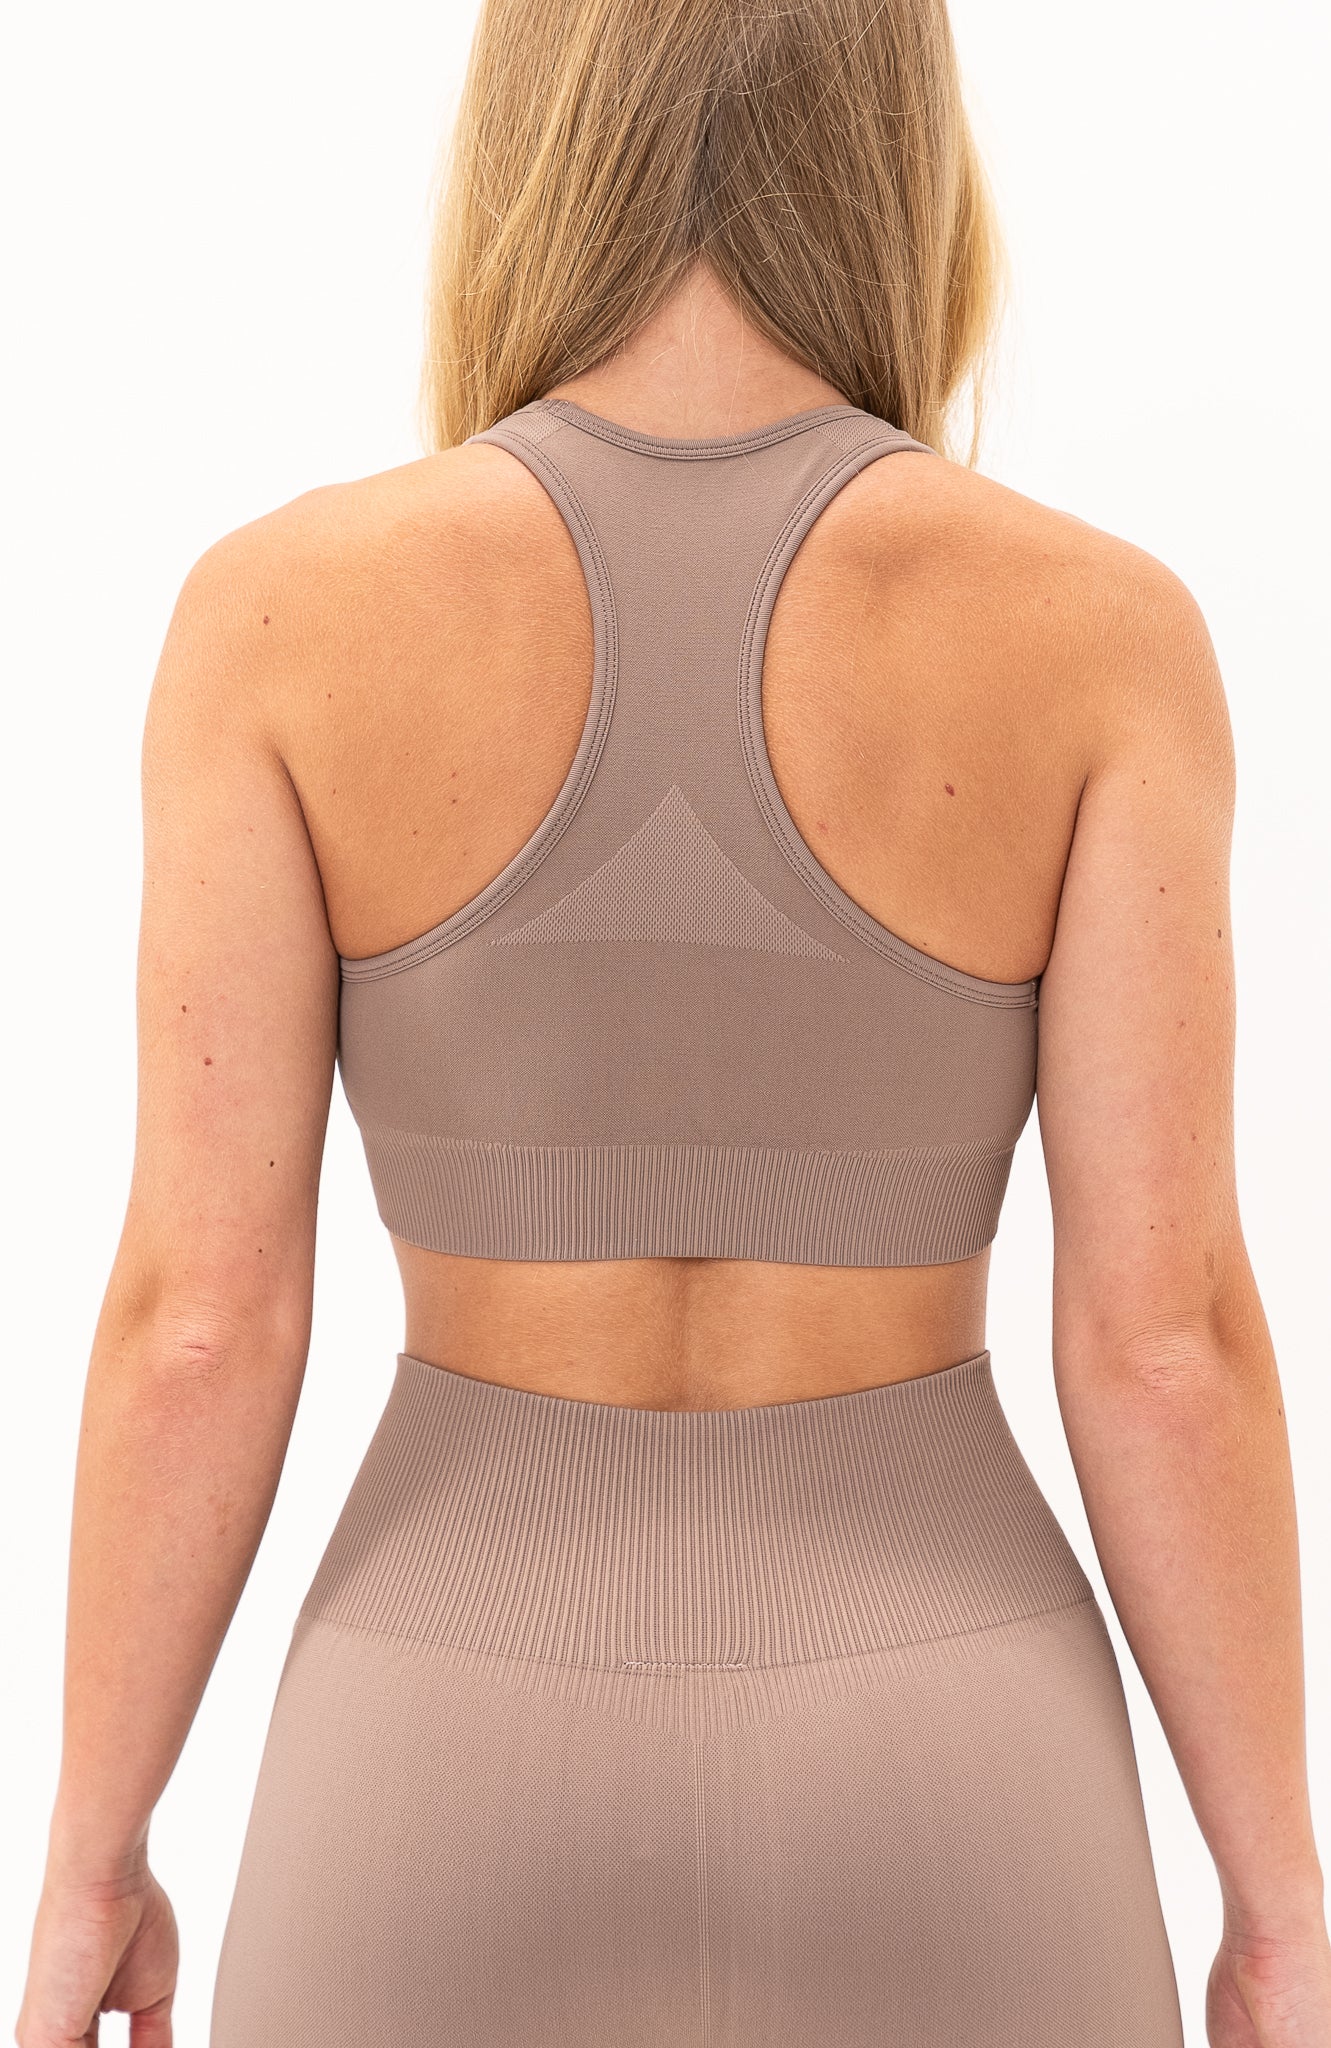 redbaysand Women's seamless Limitless training sports bra in fawn with removable padded cups and strap for gym workouts training, Running, yoga, bodybuilding and bikini fitness.